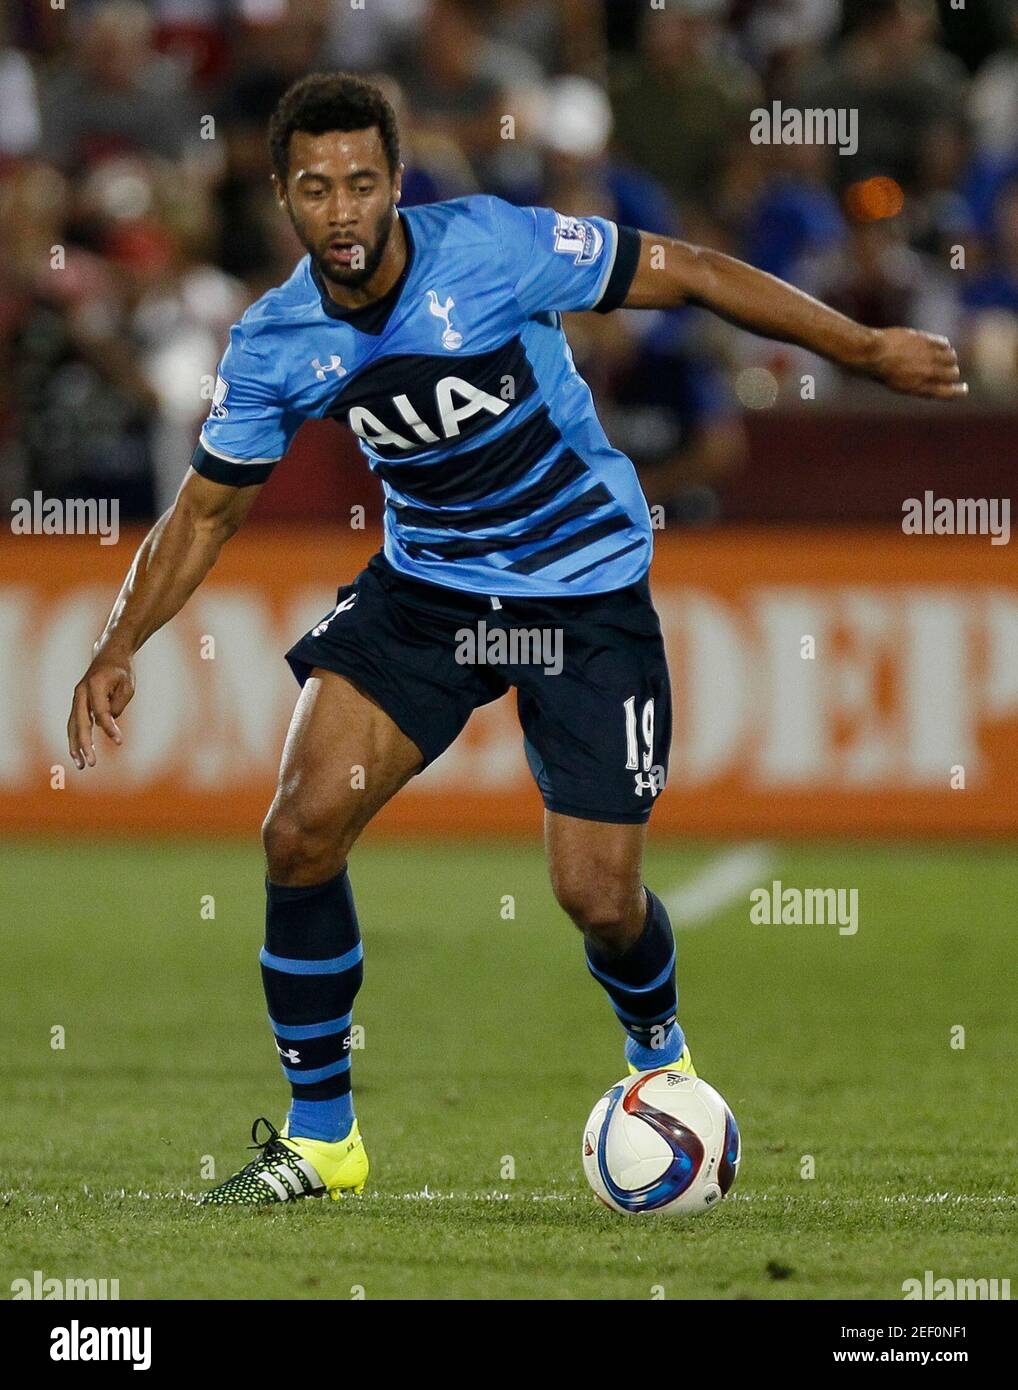 Football - MLS All-Stars v Tottenham Hotspur - AT&T MLS All Stars Game - Pre Season Friendly - Dick's Sporting Goods Park, Colorado, United States of America - 15/16 - 29/7/15  Tottenham Hotspur's Mousa Dembele  Action Images via Reuters / Rick Wilking Stock Photo